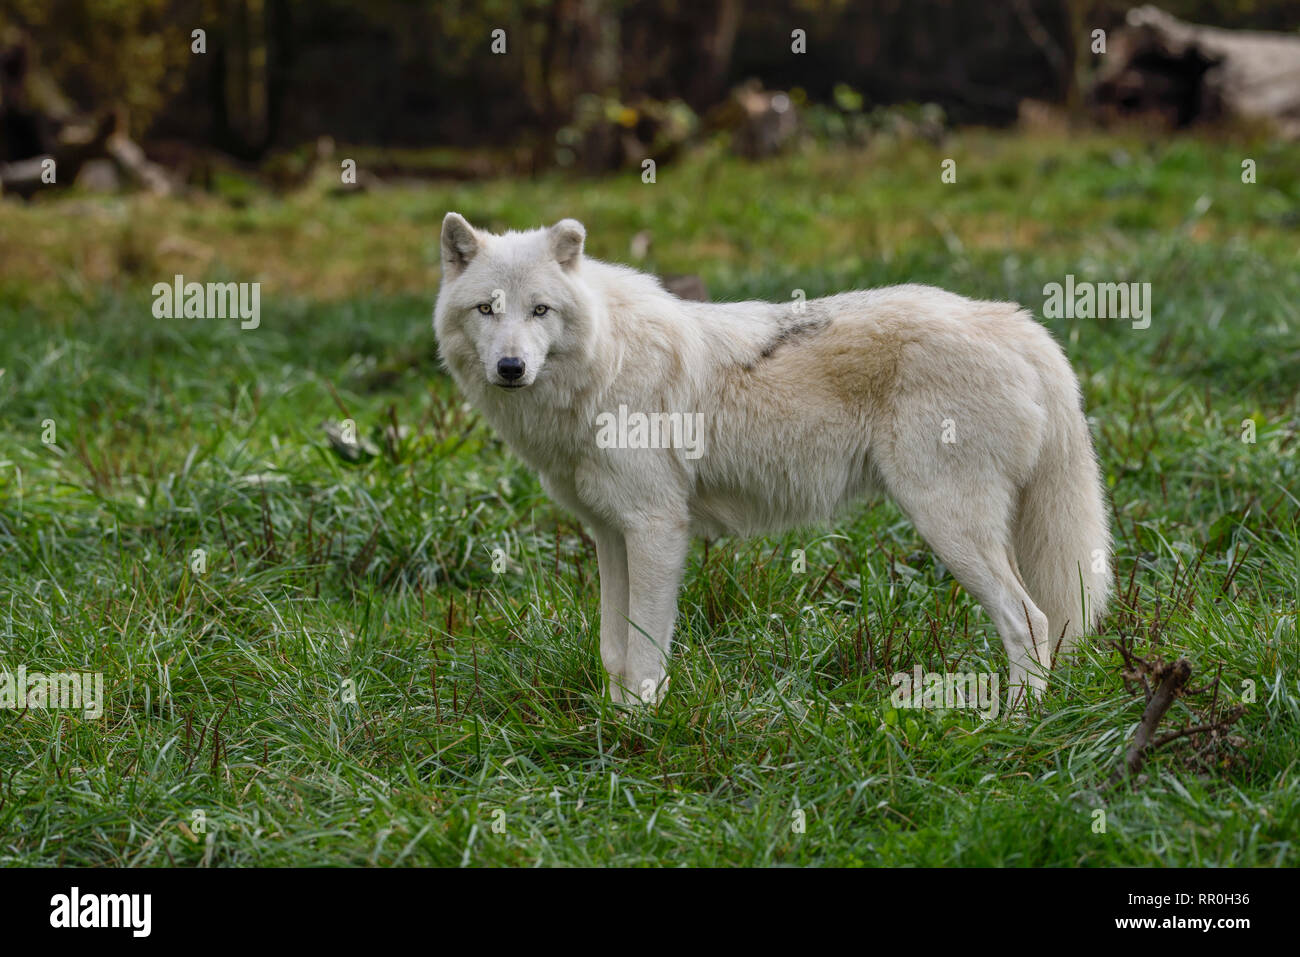 zoology / animals, mammal (mammalia), Arctic wolf, polar wolf or arctic wolf  (Canis lupus arctos), Par, Additional-Rights-Clearance-Info-Not-Available  Stock Photo - Alamy